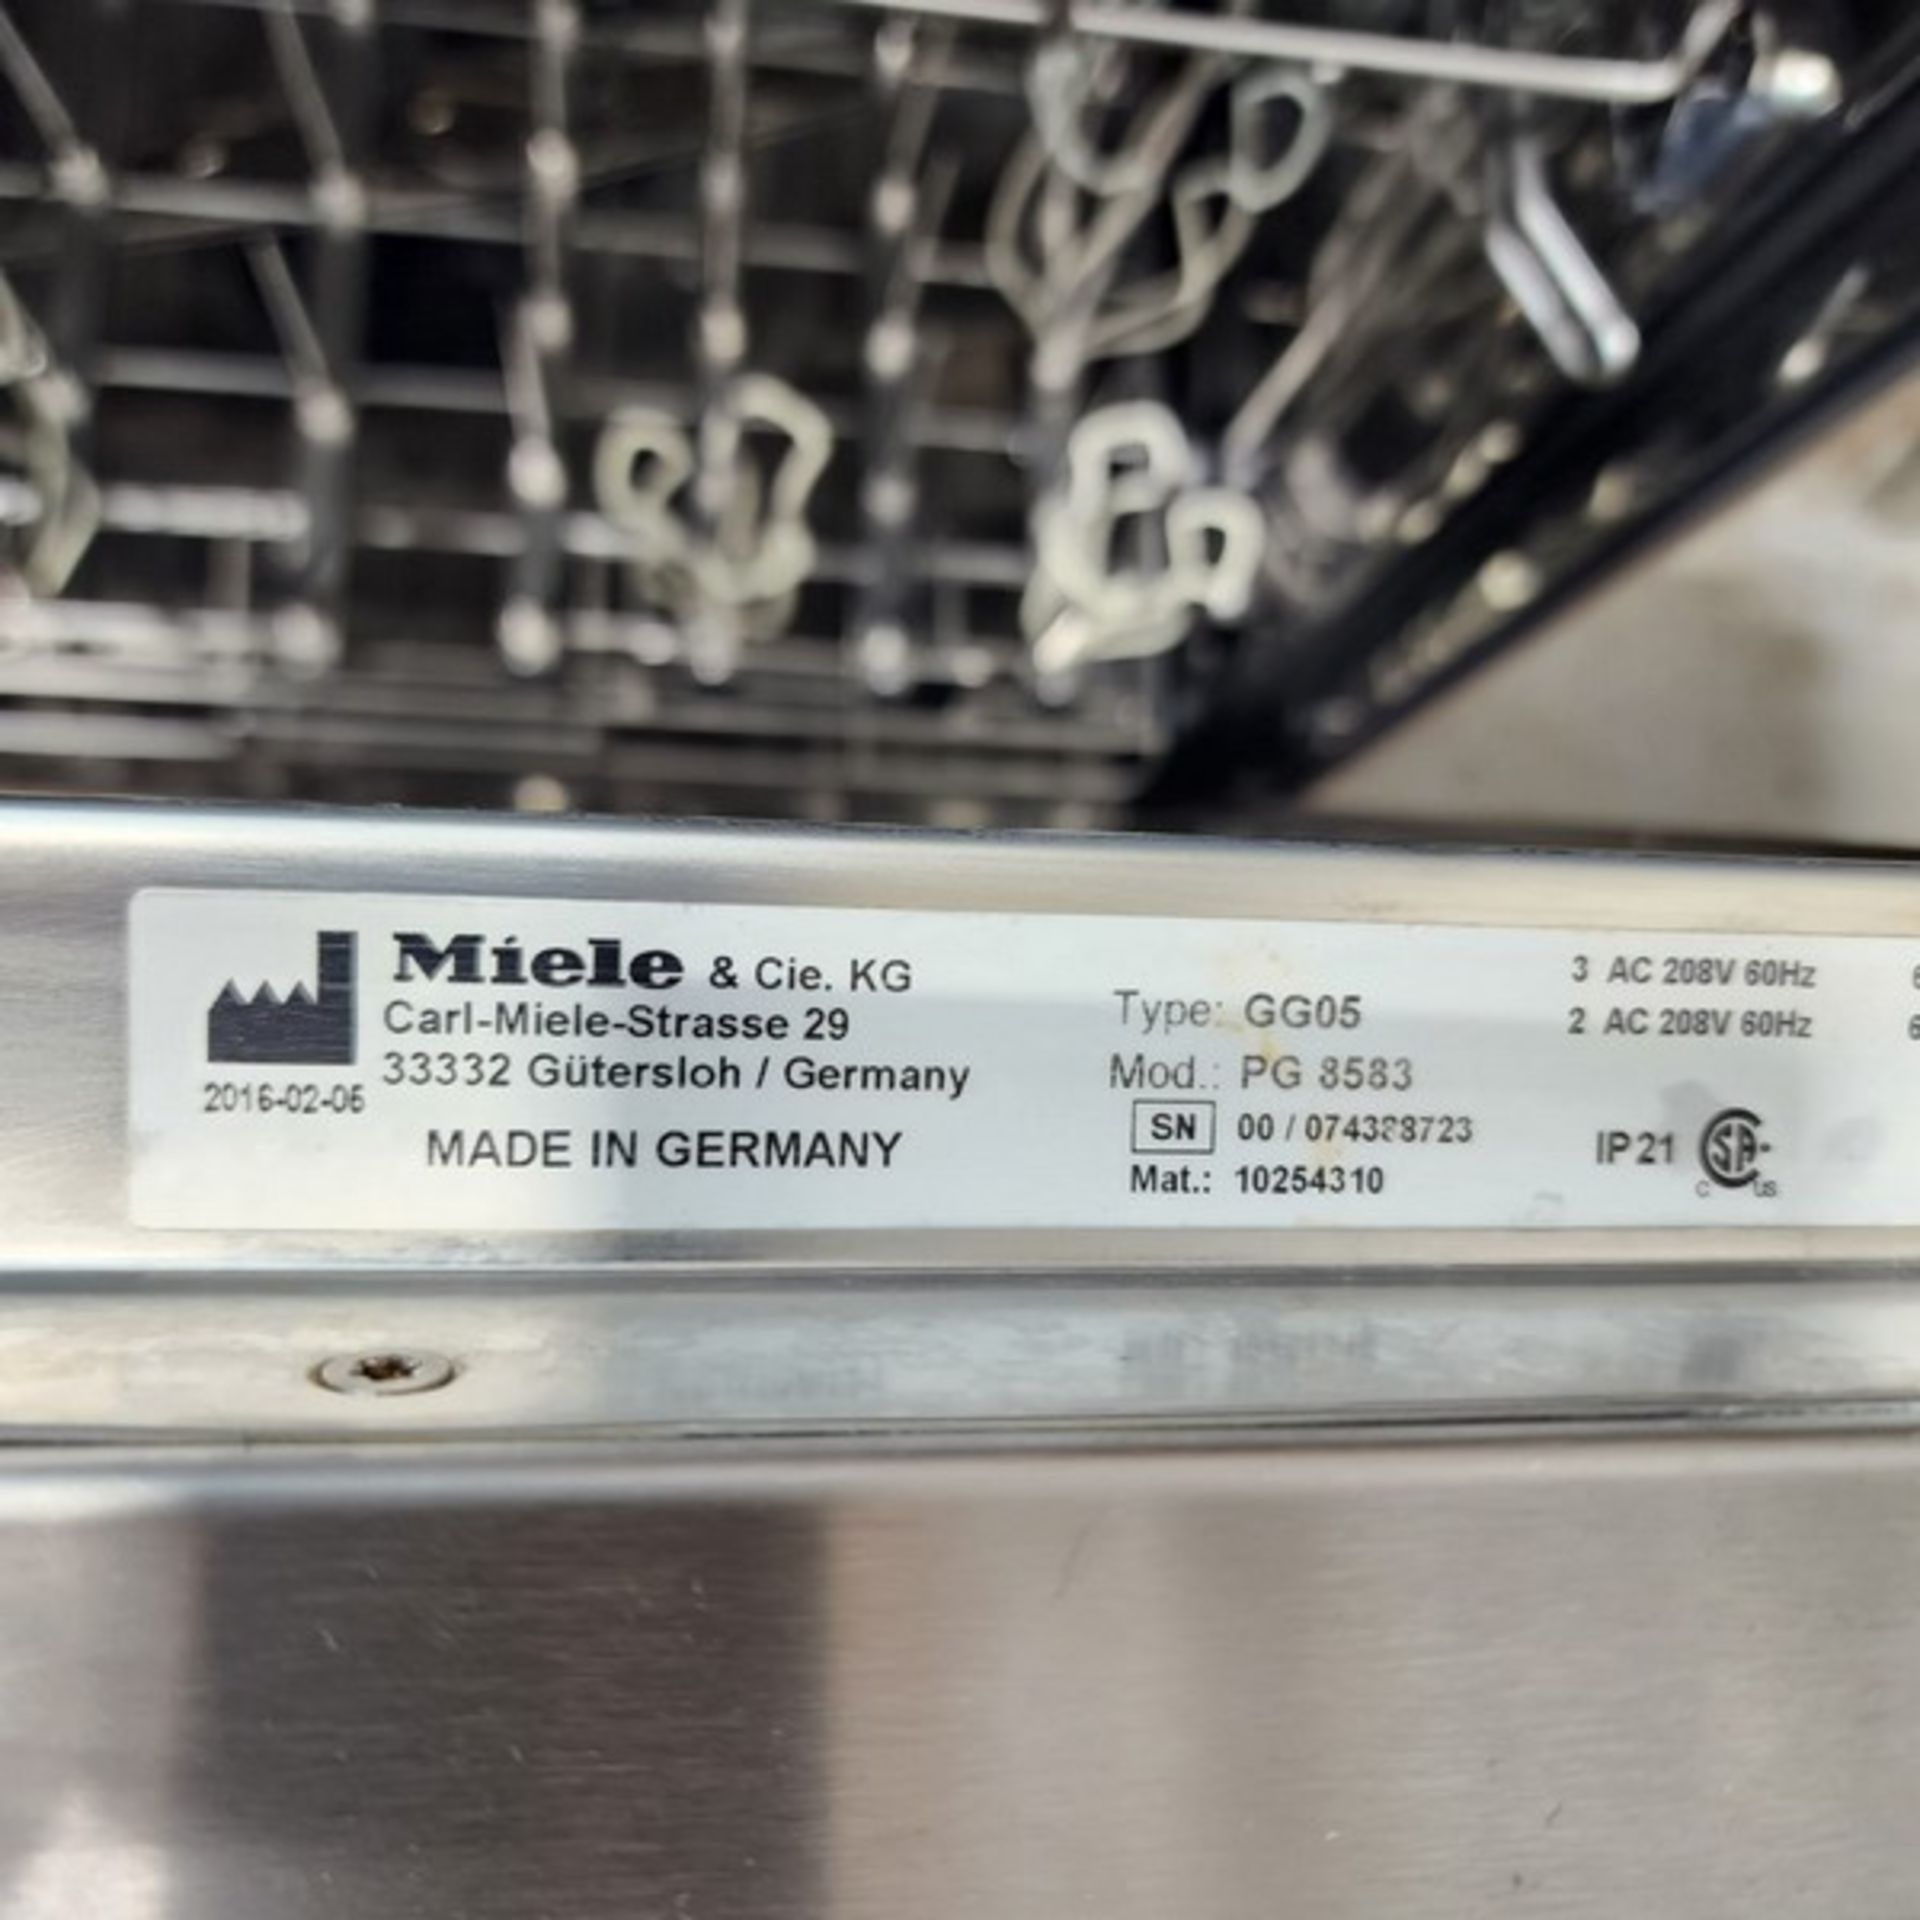 Miele Commercial Dishwasher high-quality Model PG 8583. Electric specifications: 208 volts, 60hz, - Image 7 of 7